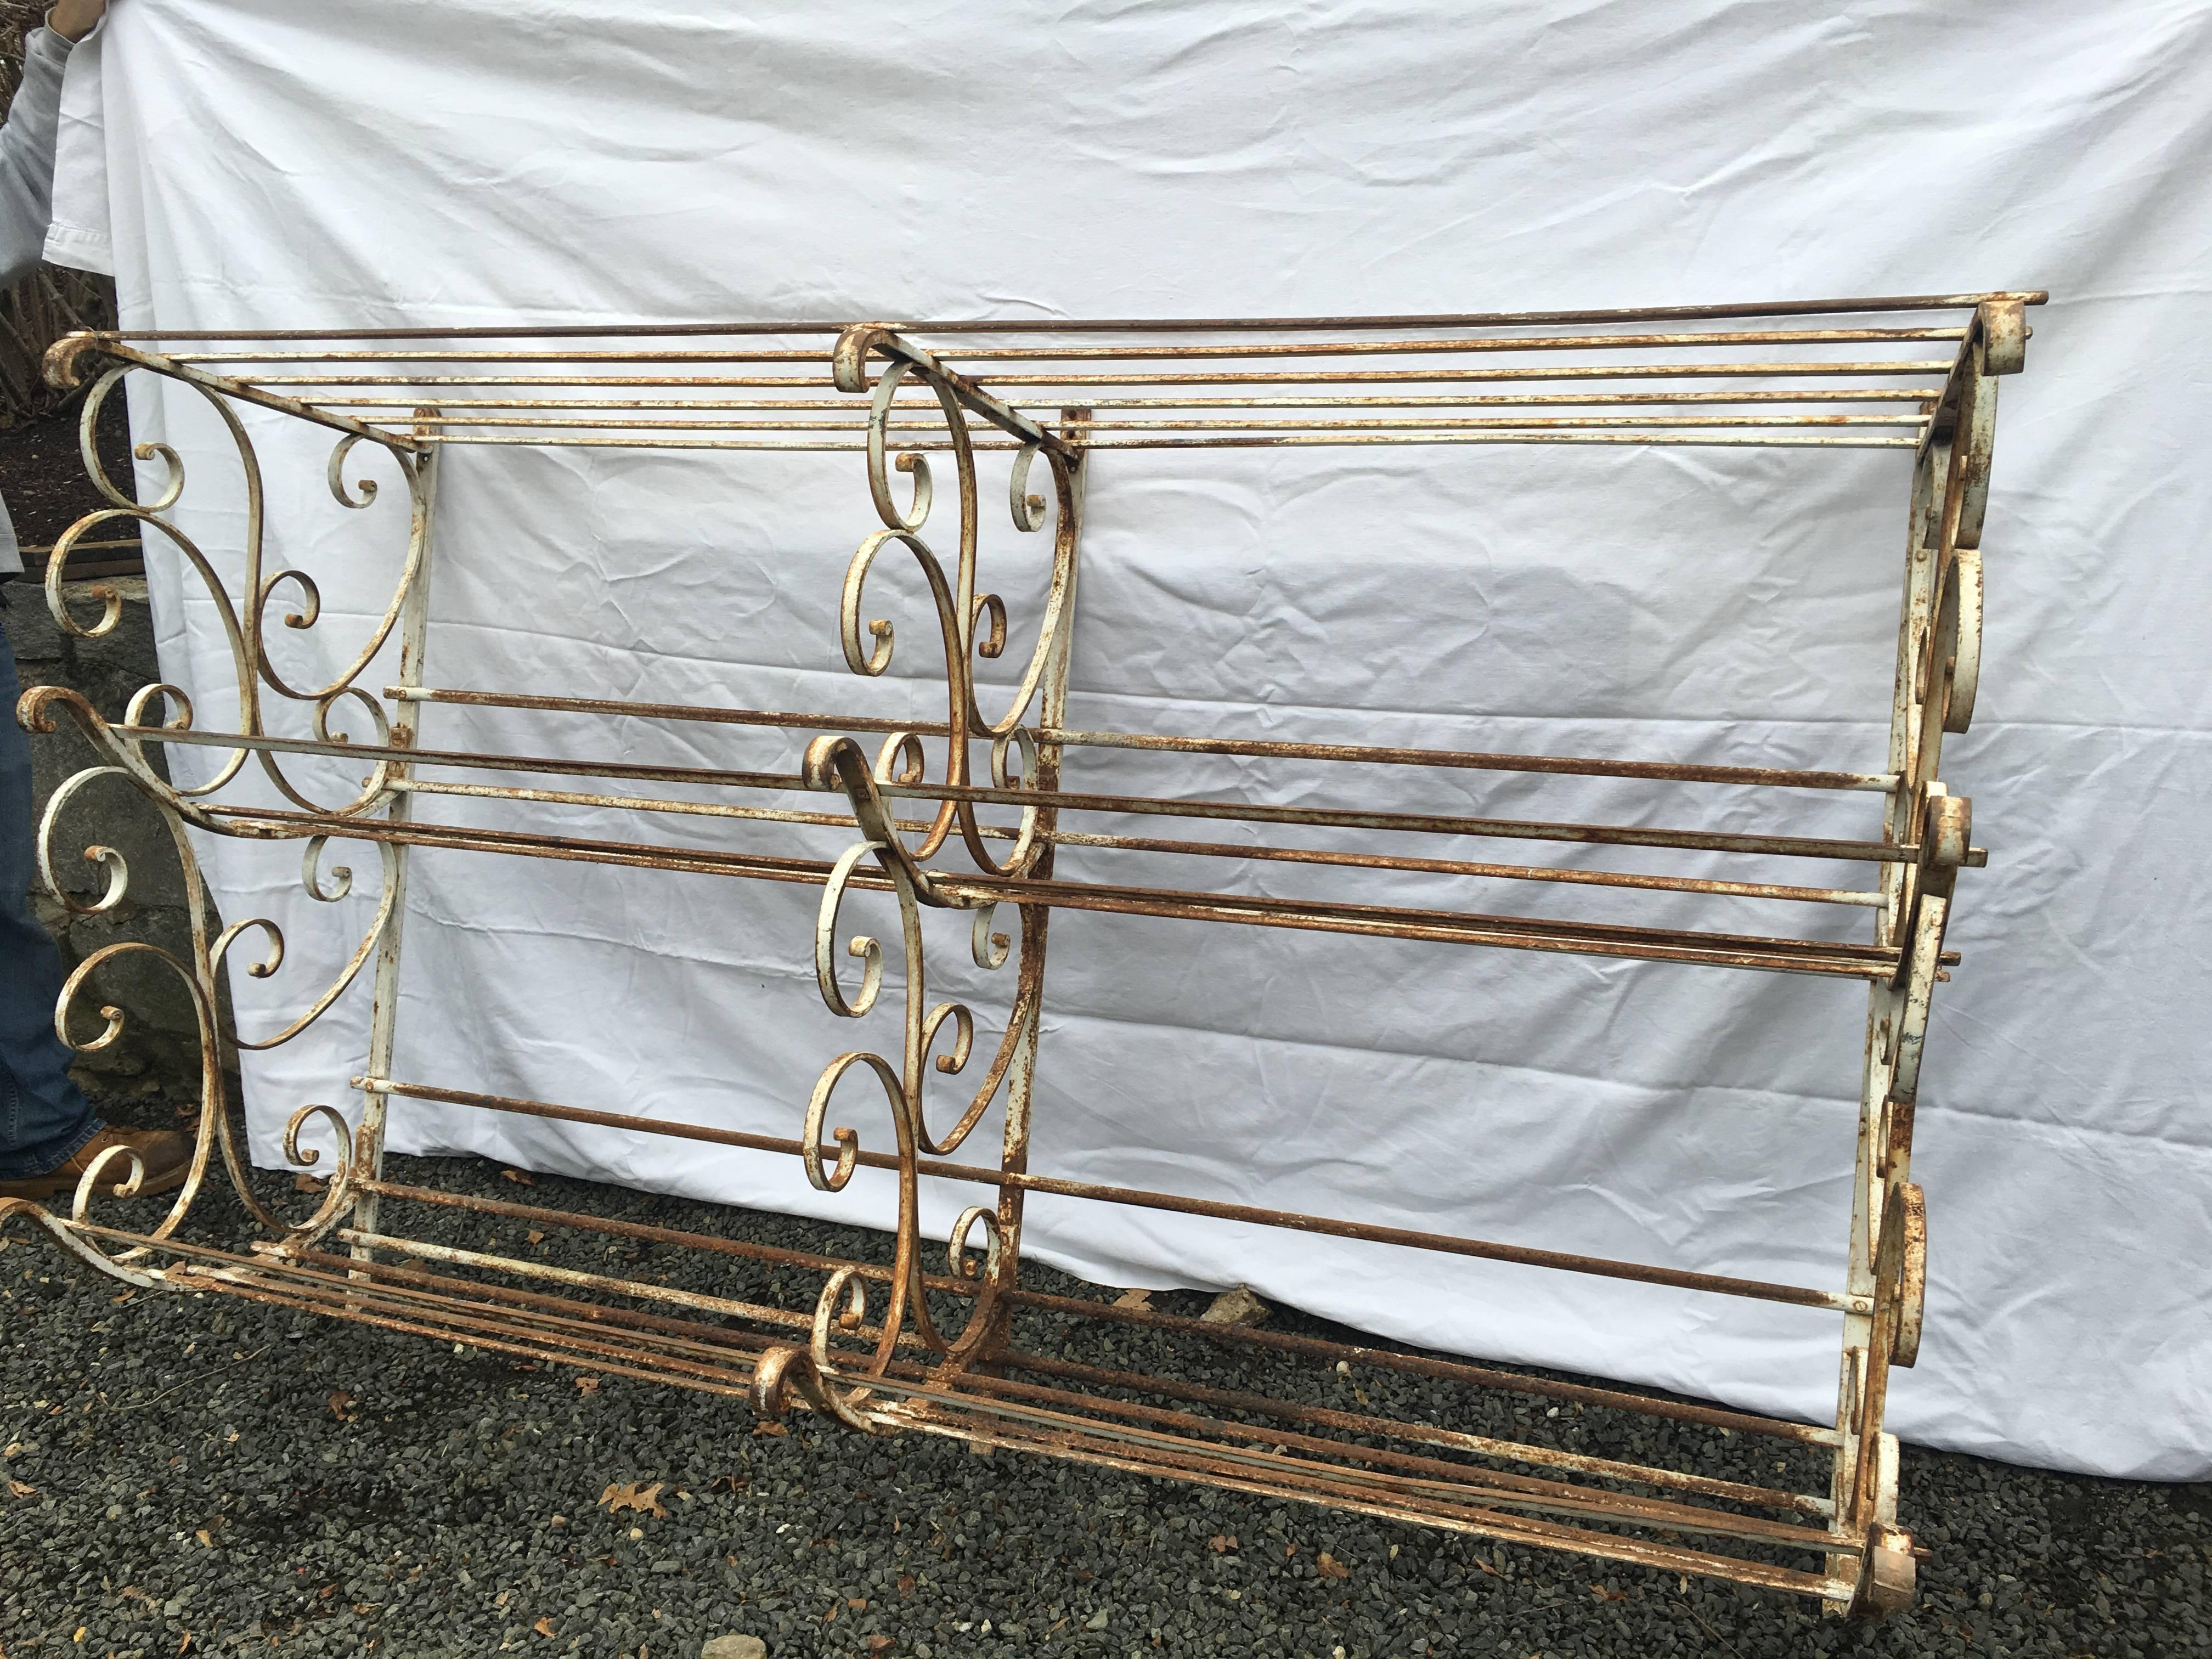 What an unusual and rare piece! Straight from a boulangerie in the Southwest of France, this hand-wrought iron rack in original, worn white painted surface with some rust was originally used to store baguettes. We think it would make an amazing